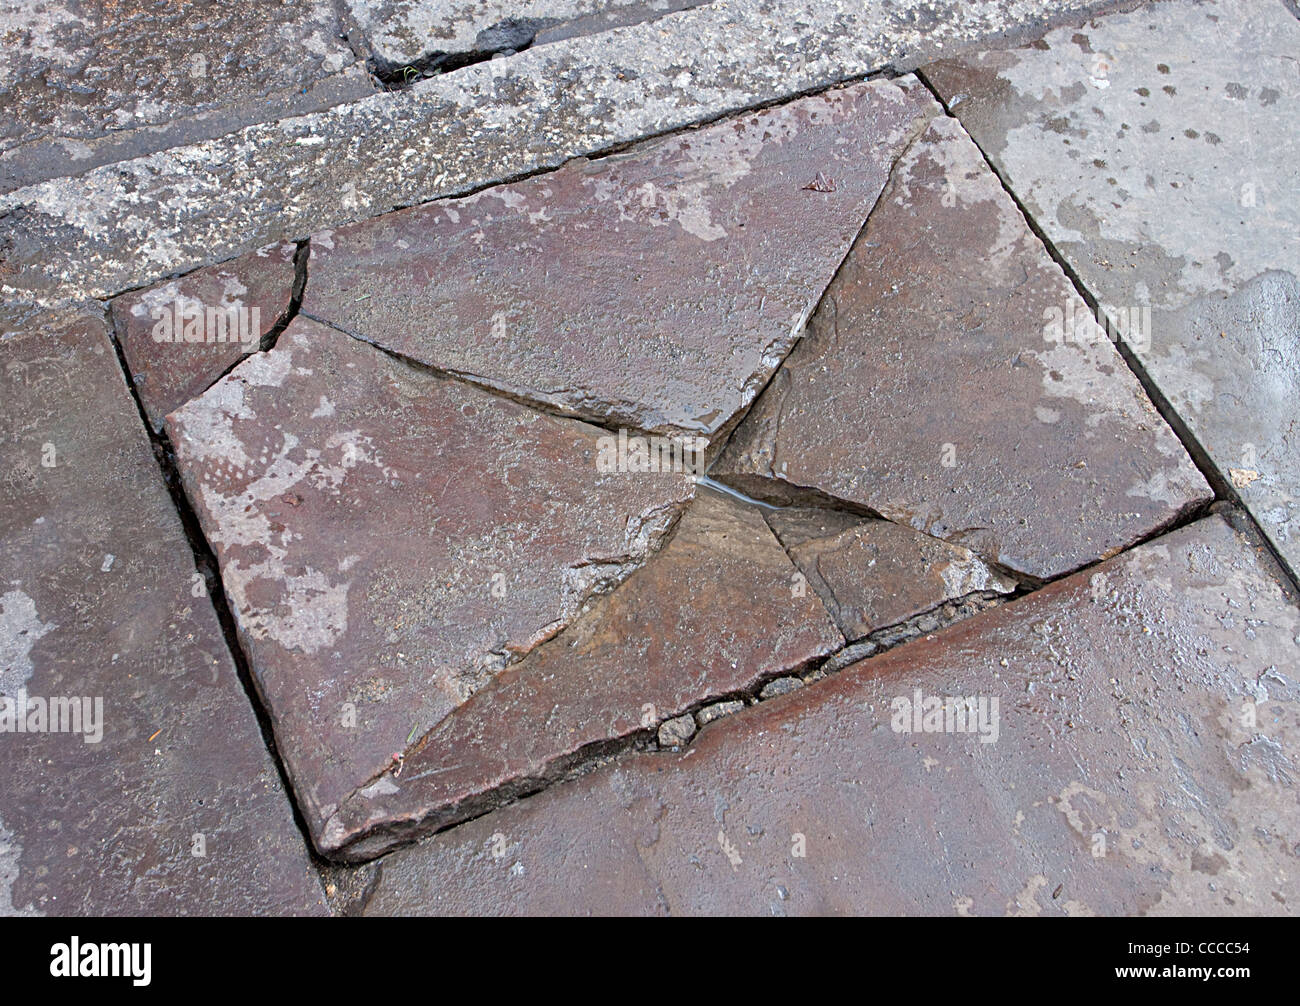 Cracked dangerous paving pavement path health and safety. Broken pavement slab broken paving Stock Photo